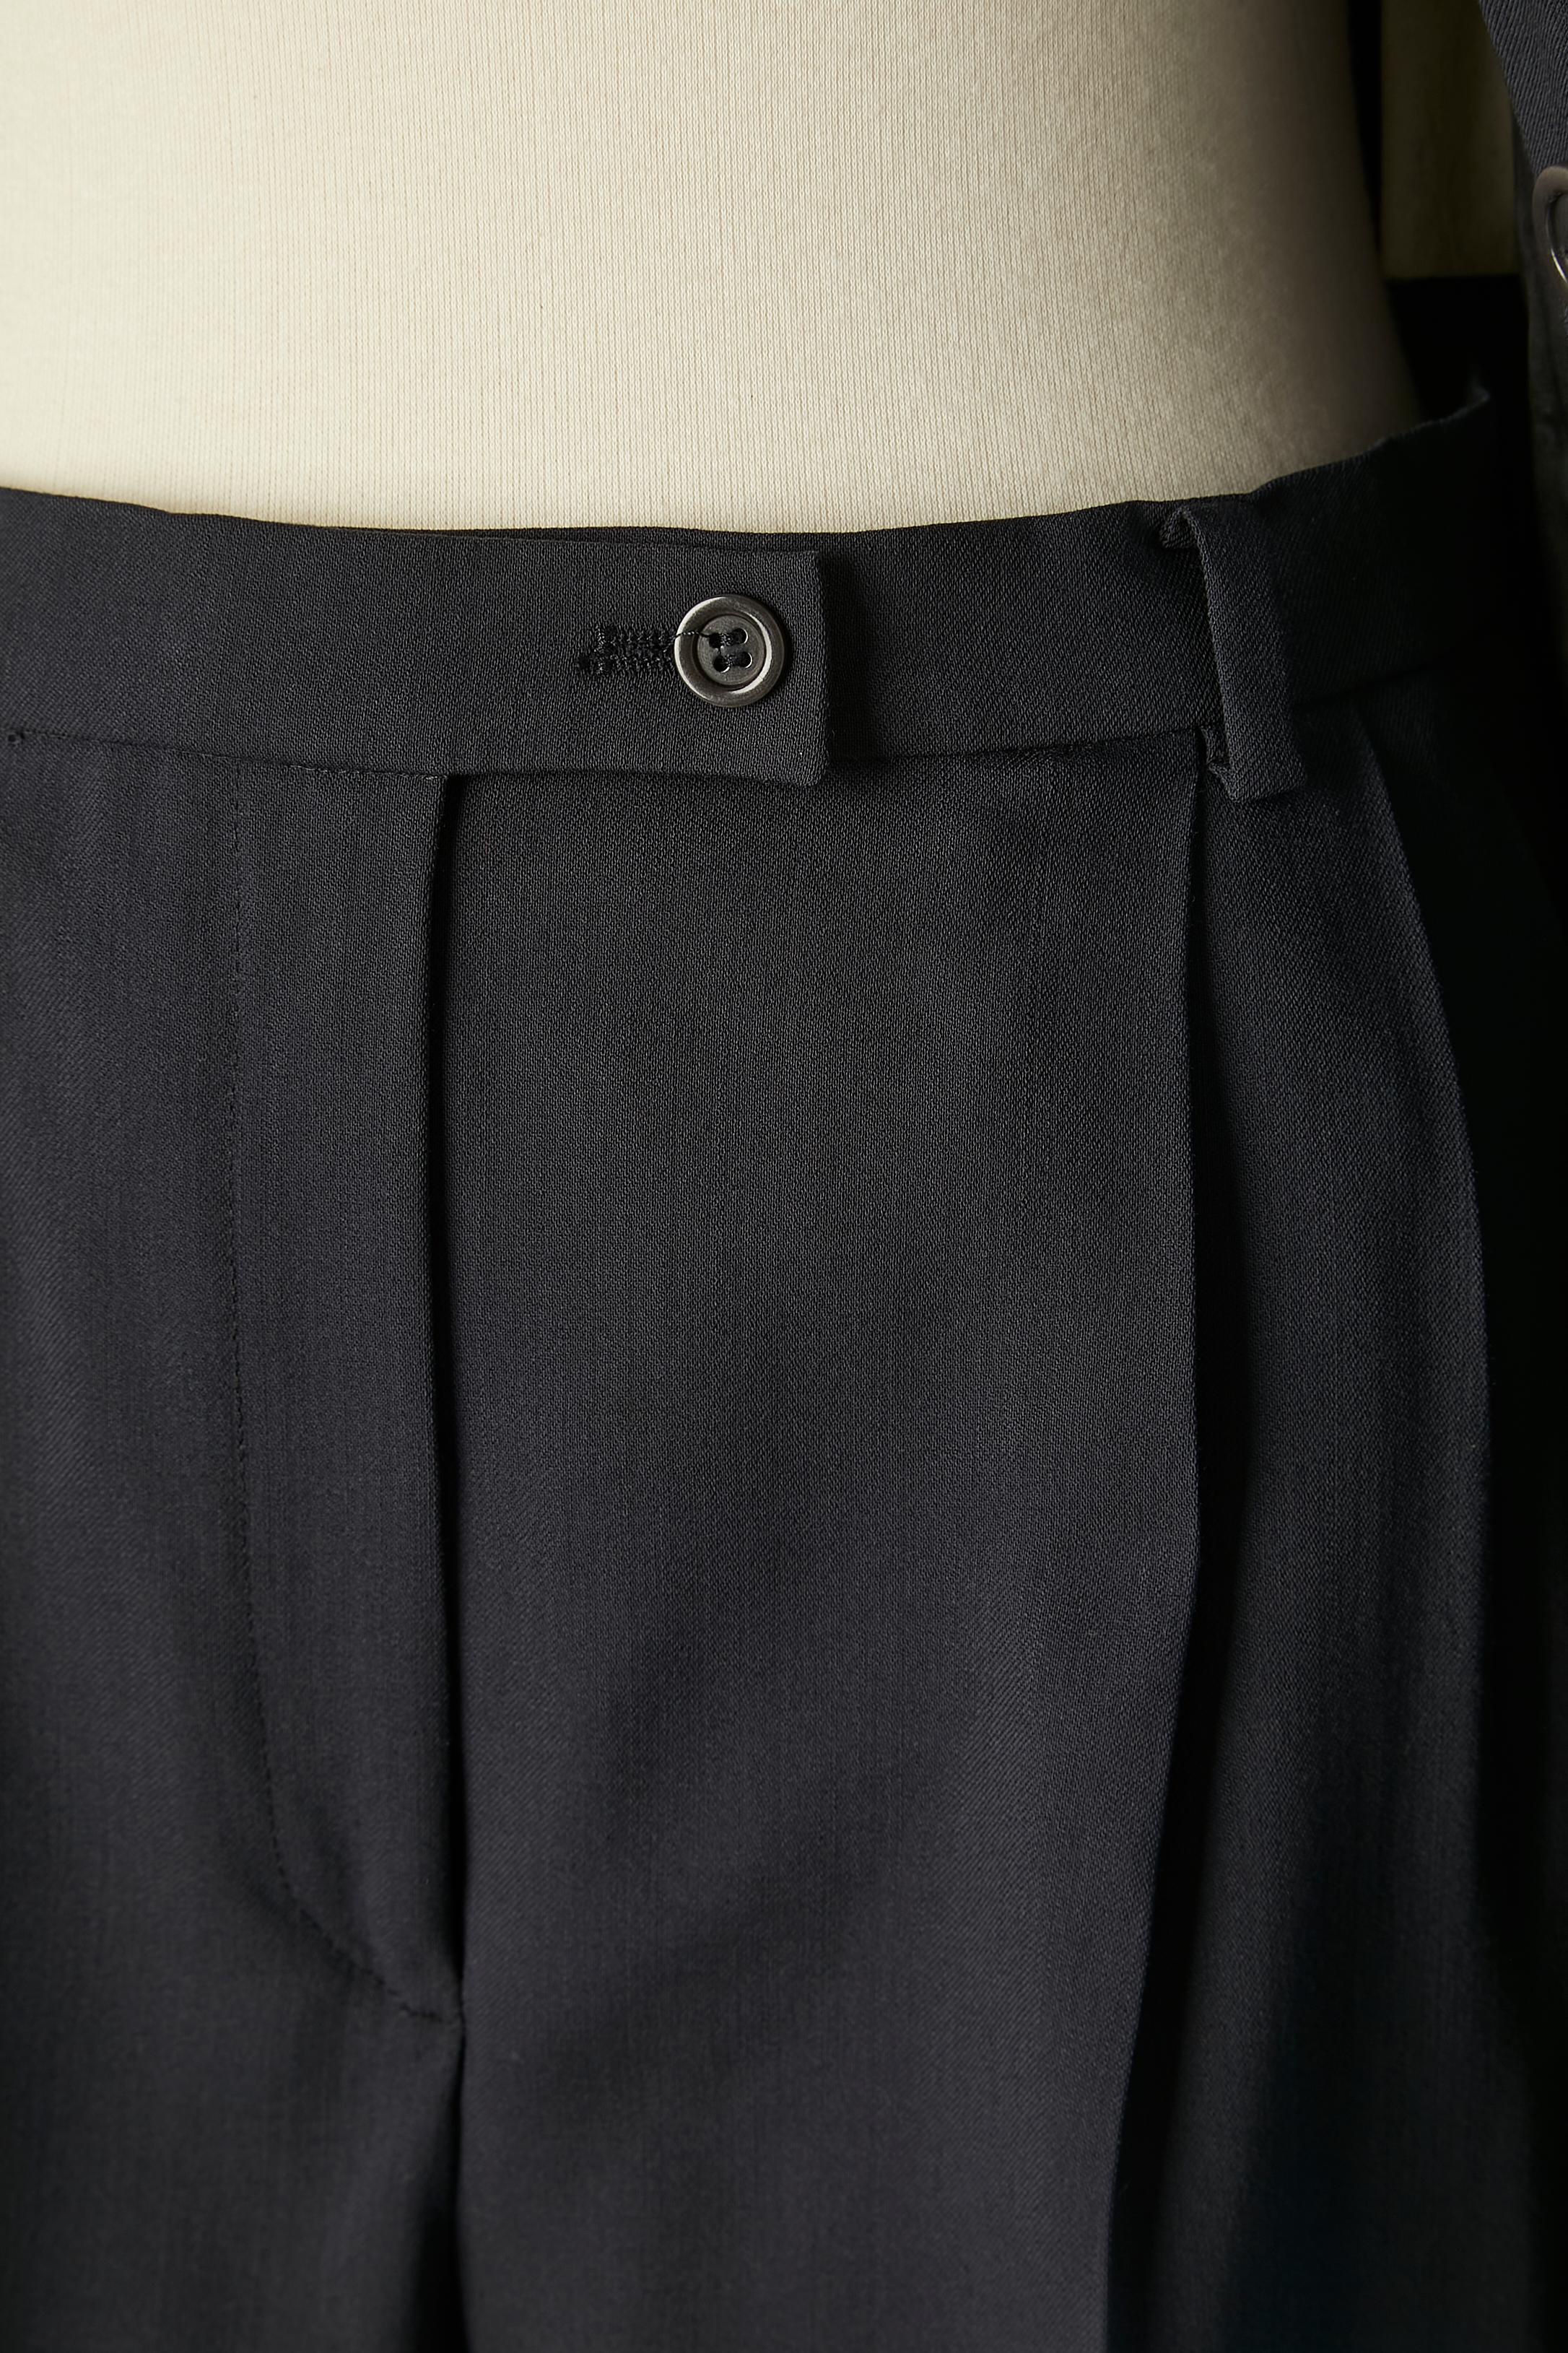 Wool navy blue trouser-suit (and skirt as well) Cerruti 1881 For Sale 3